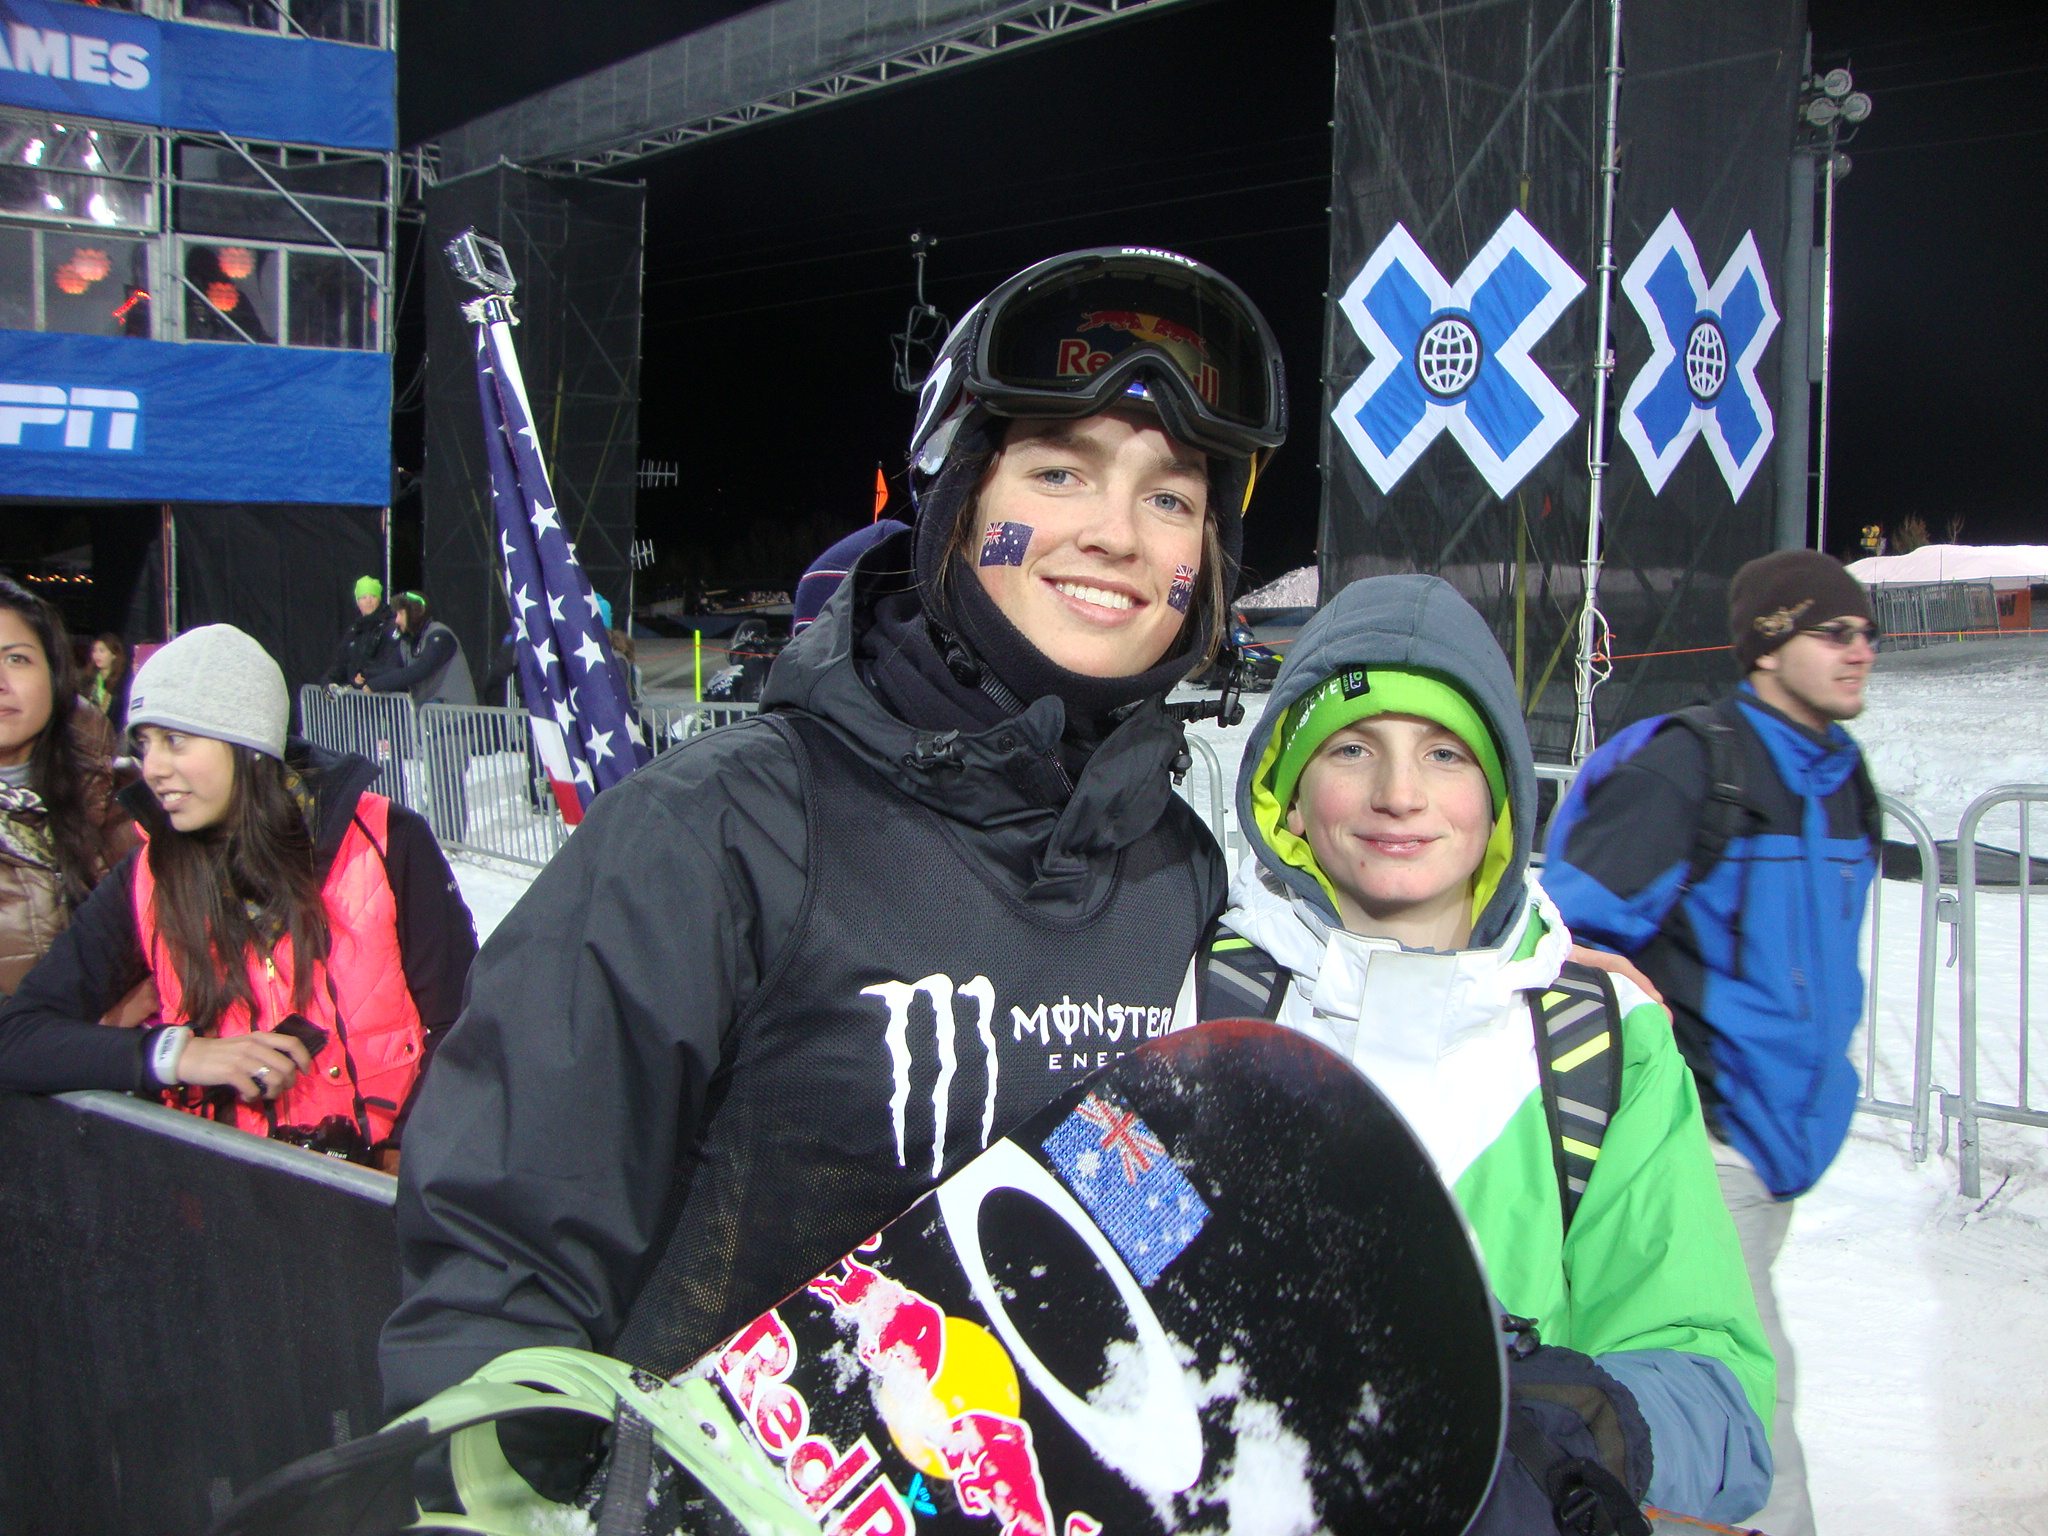 Winter X Games 2012 Men's SNB SuperPipe preview: Shaun White and